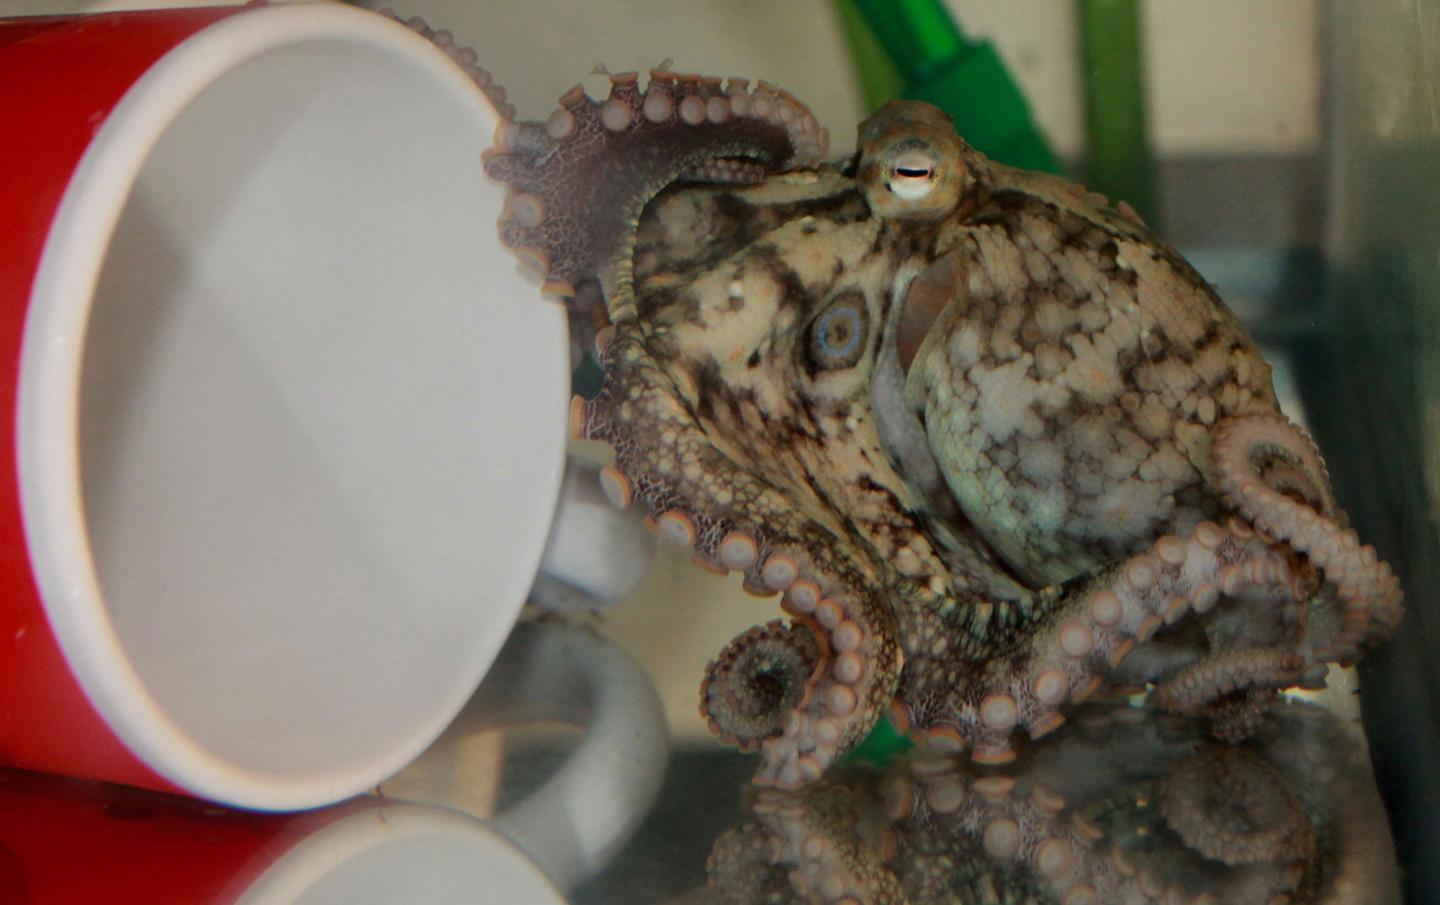 Octopus touching cup